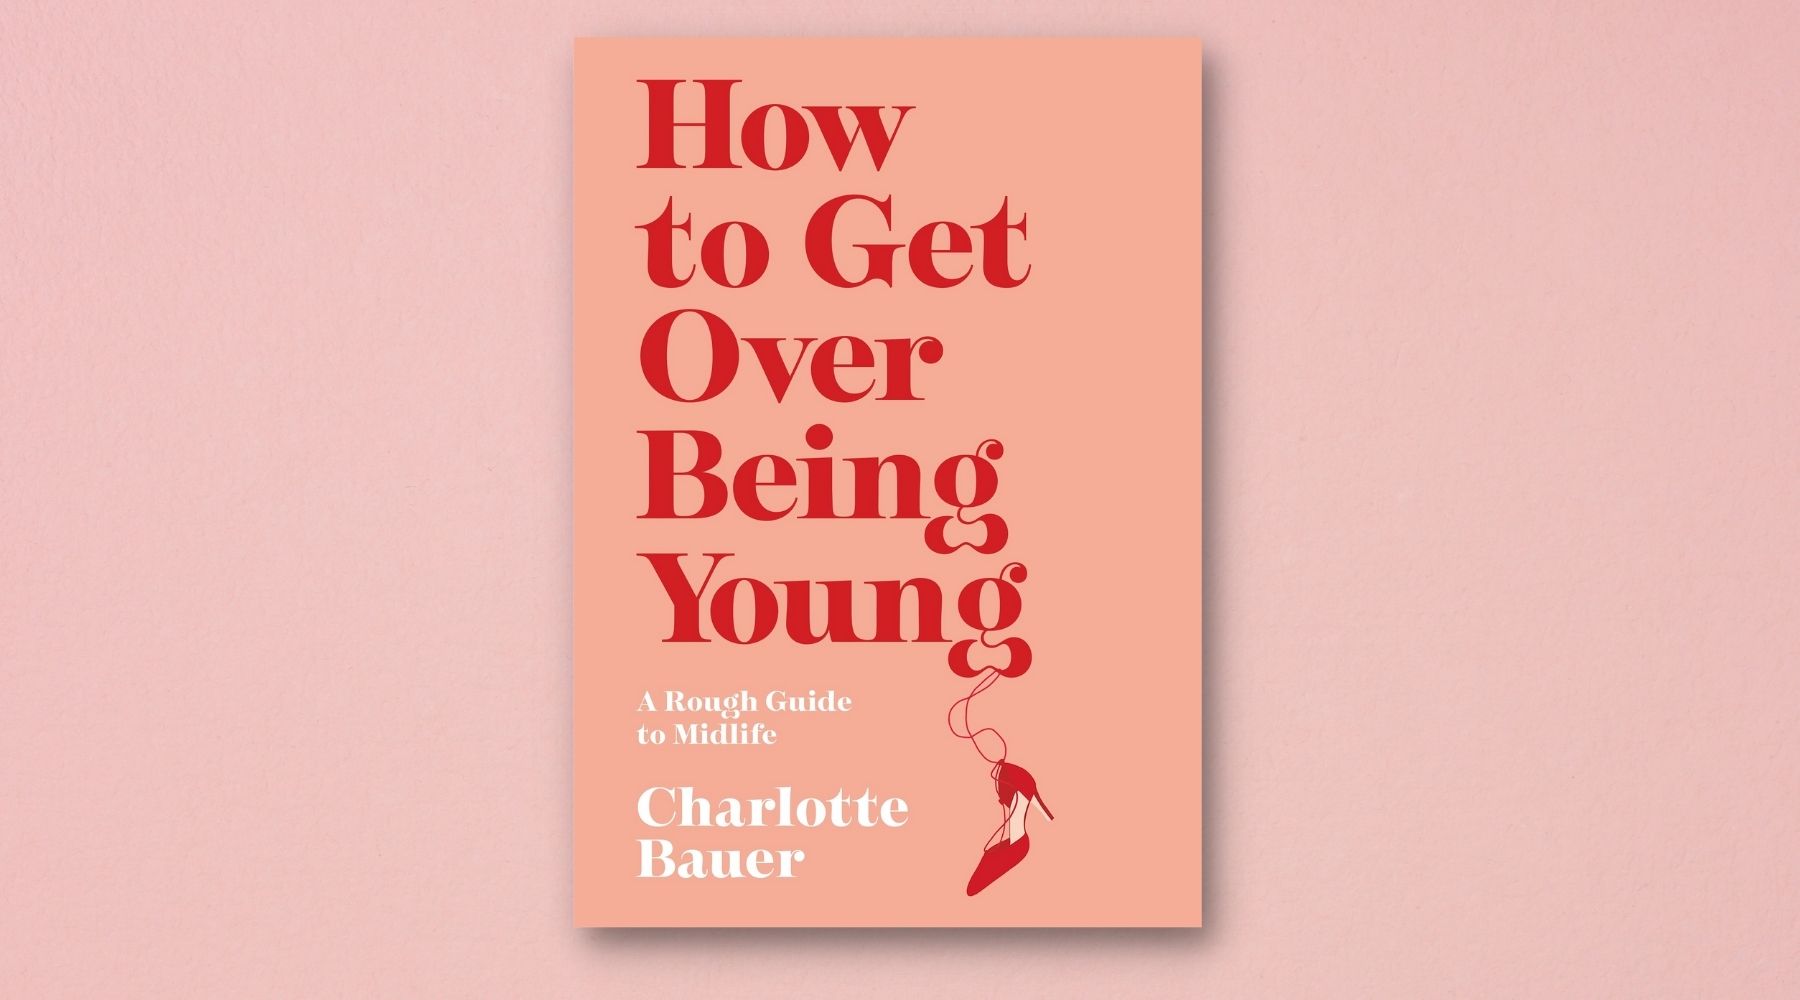 How to Get Over Being Young by Charlotte Bauer